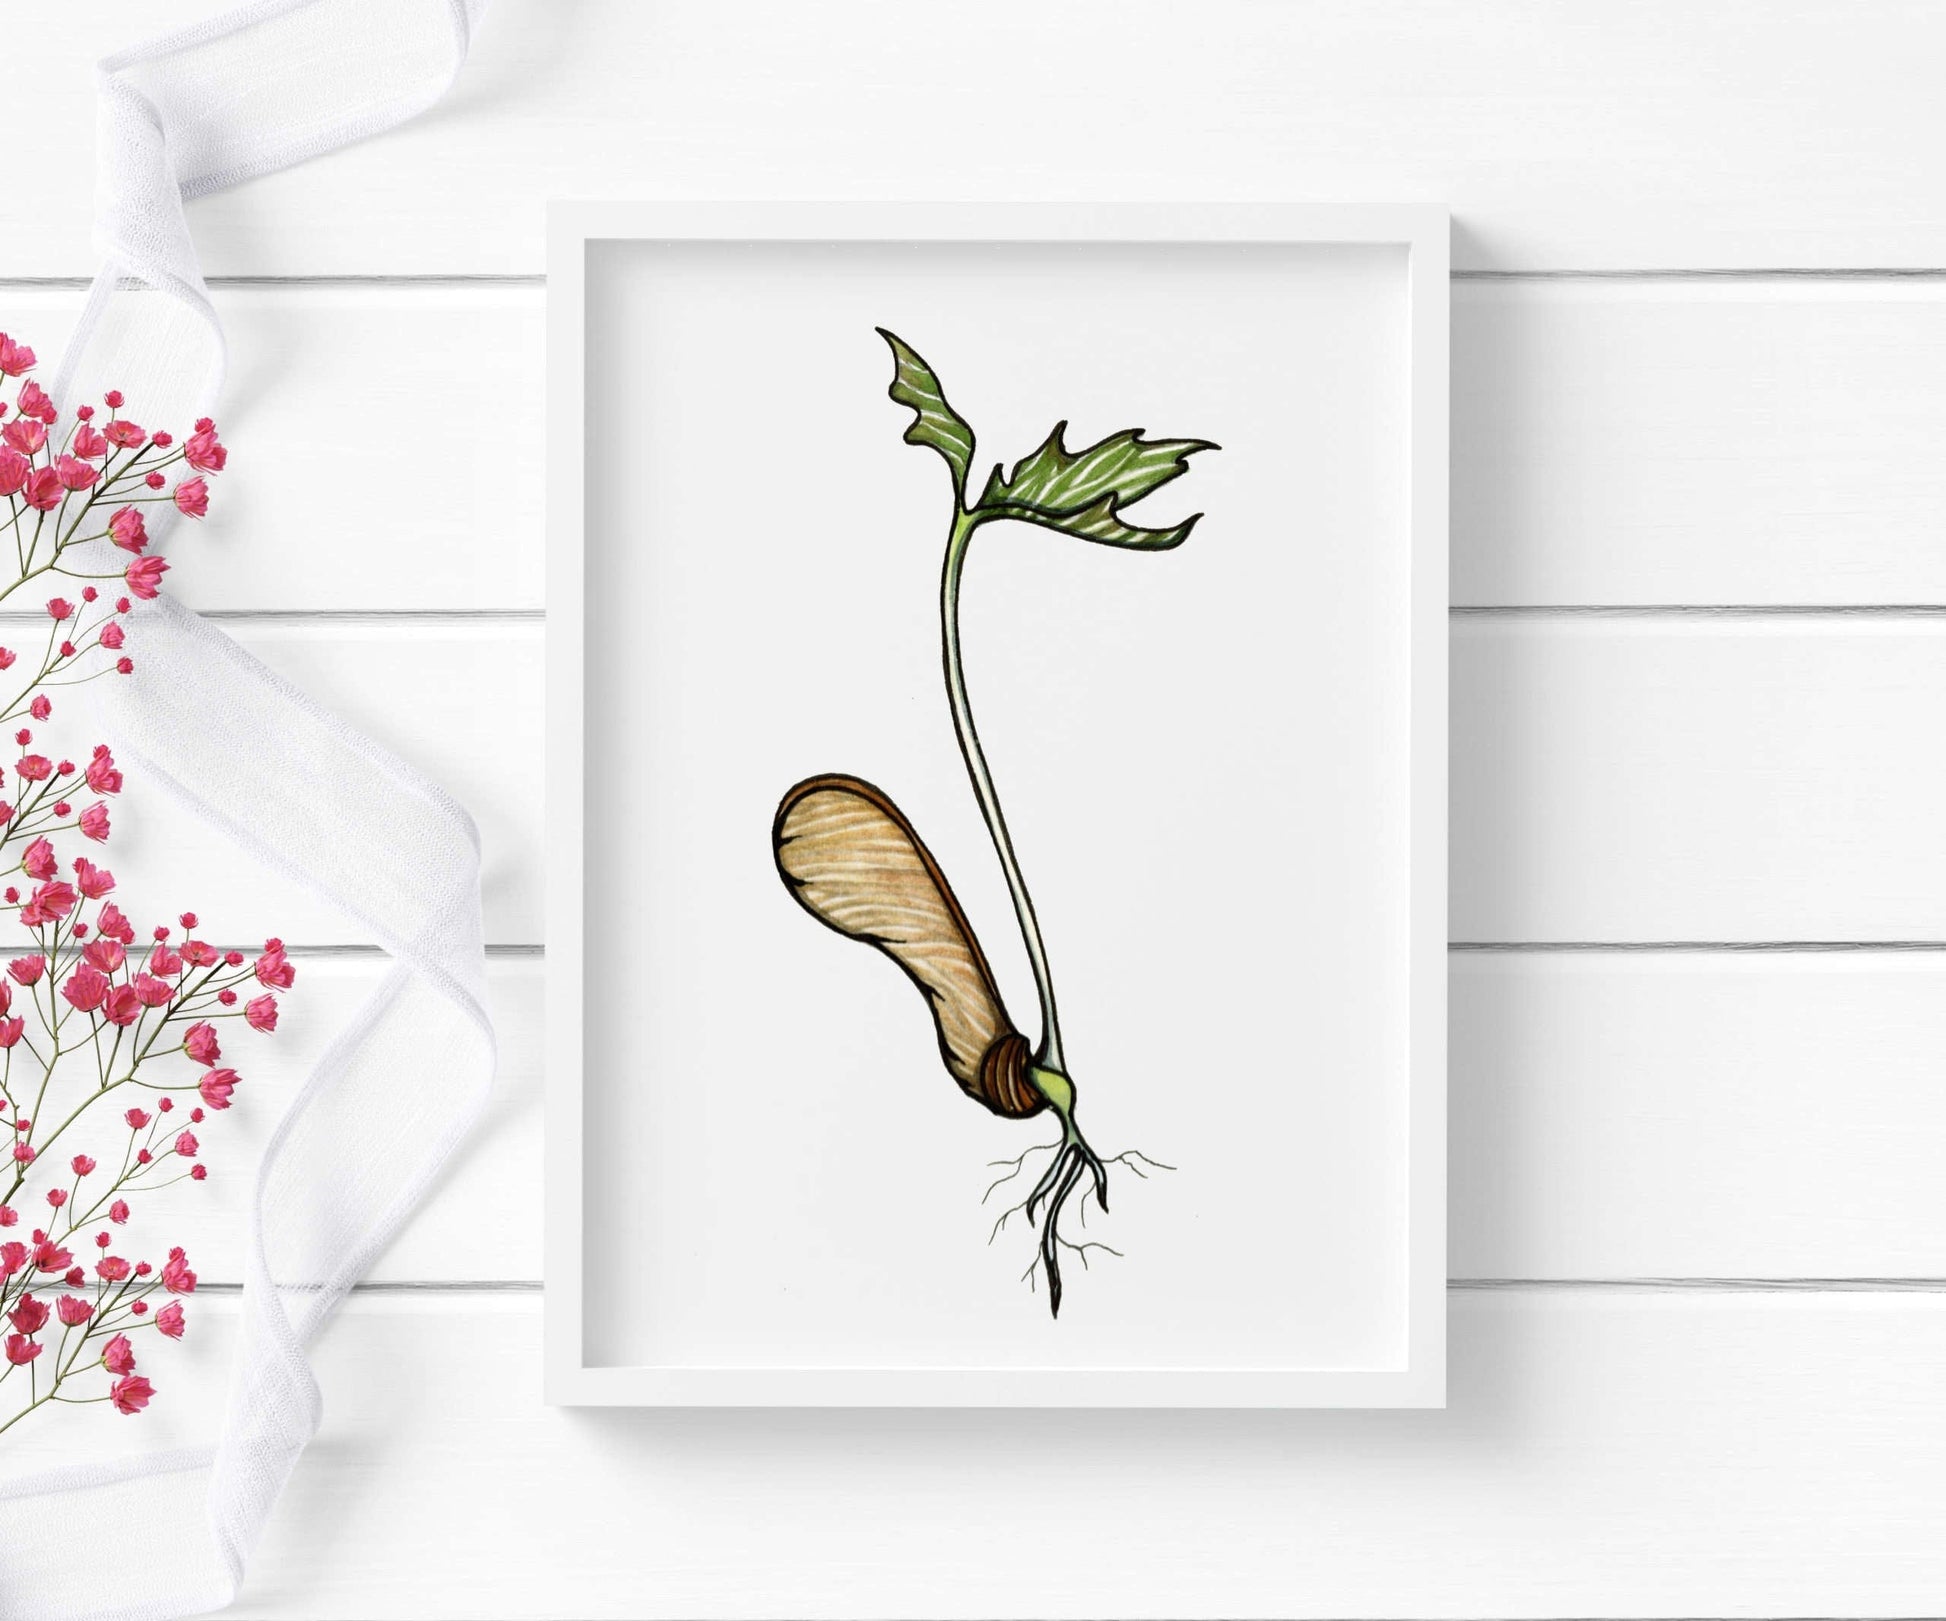 PinkPolish Design Art Prints "Maple Seed Sprout" Watercolor Painting: Art Print